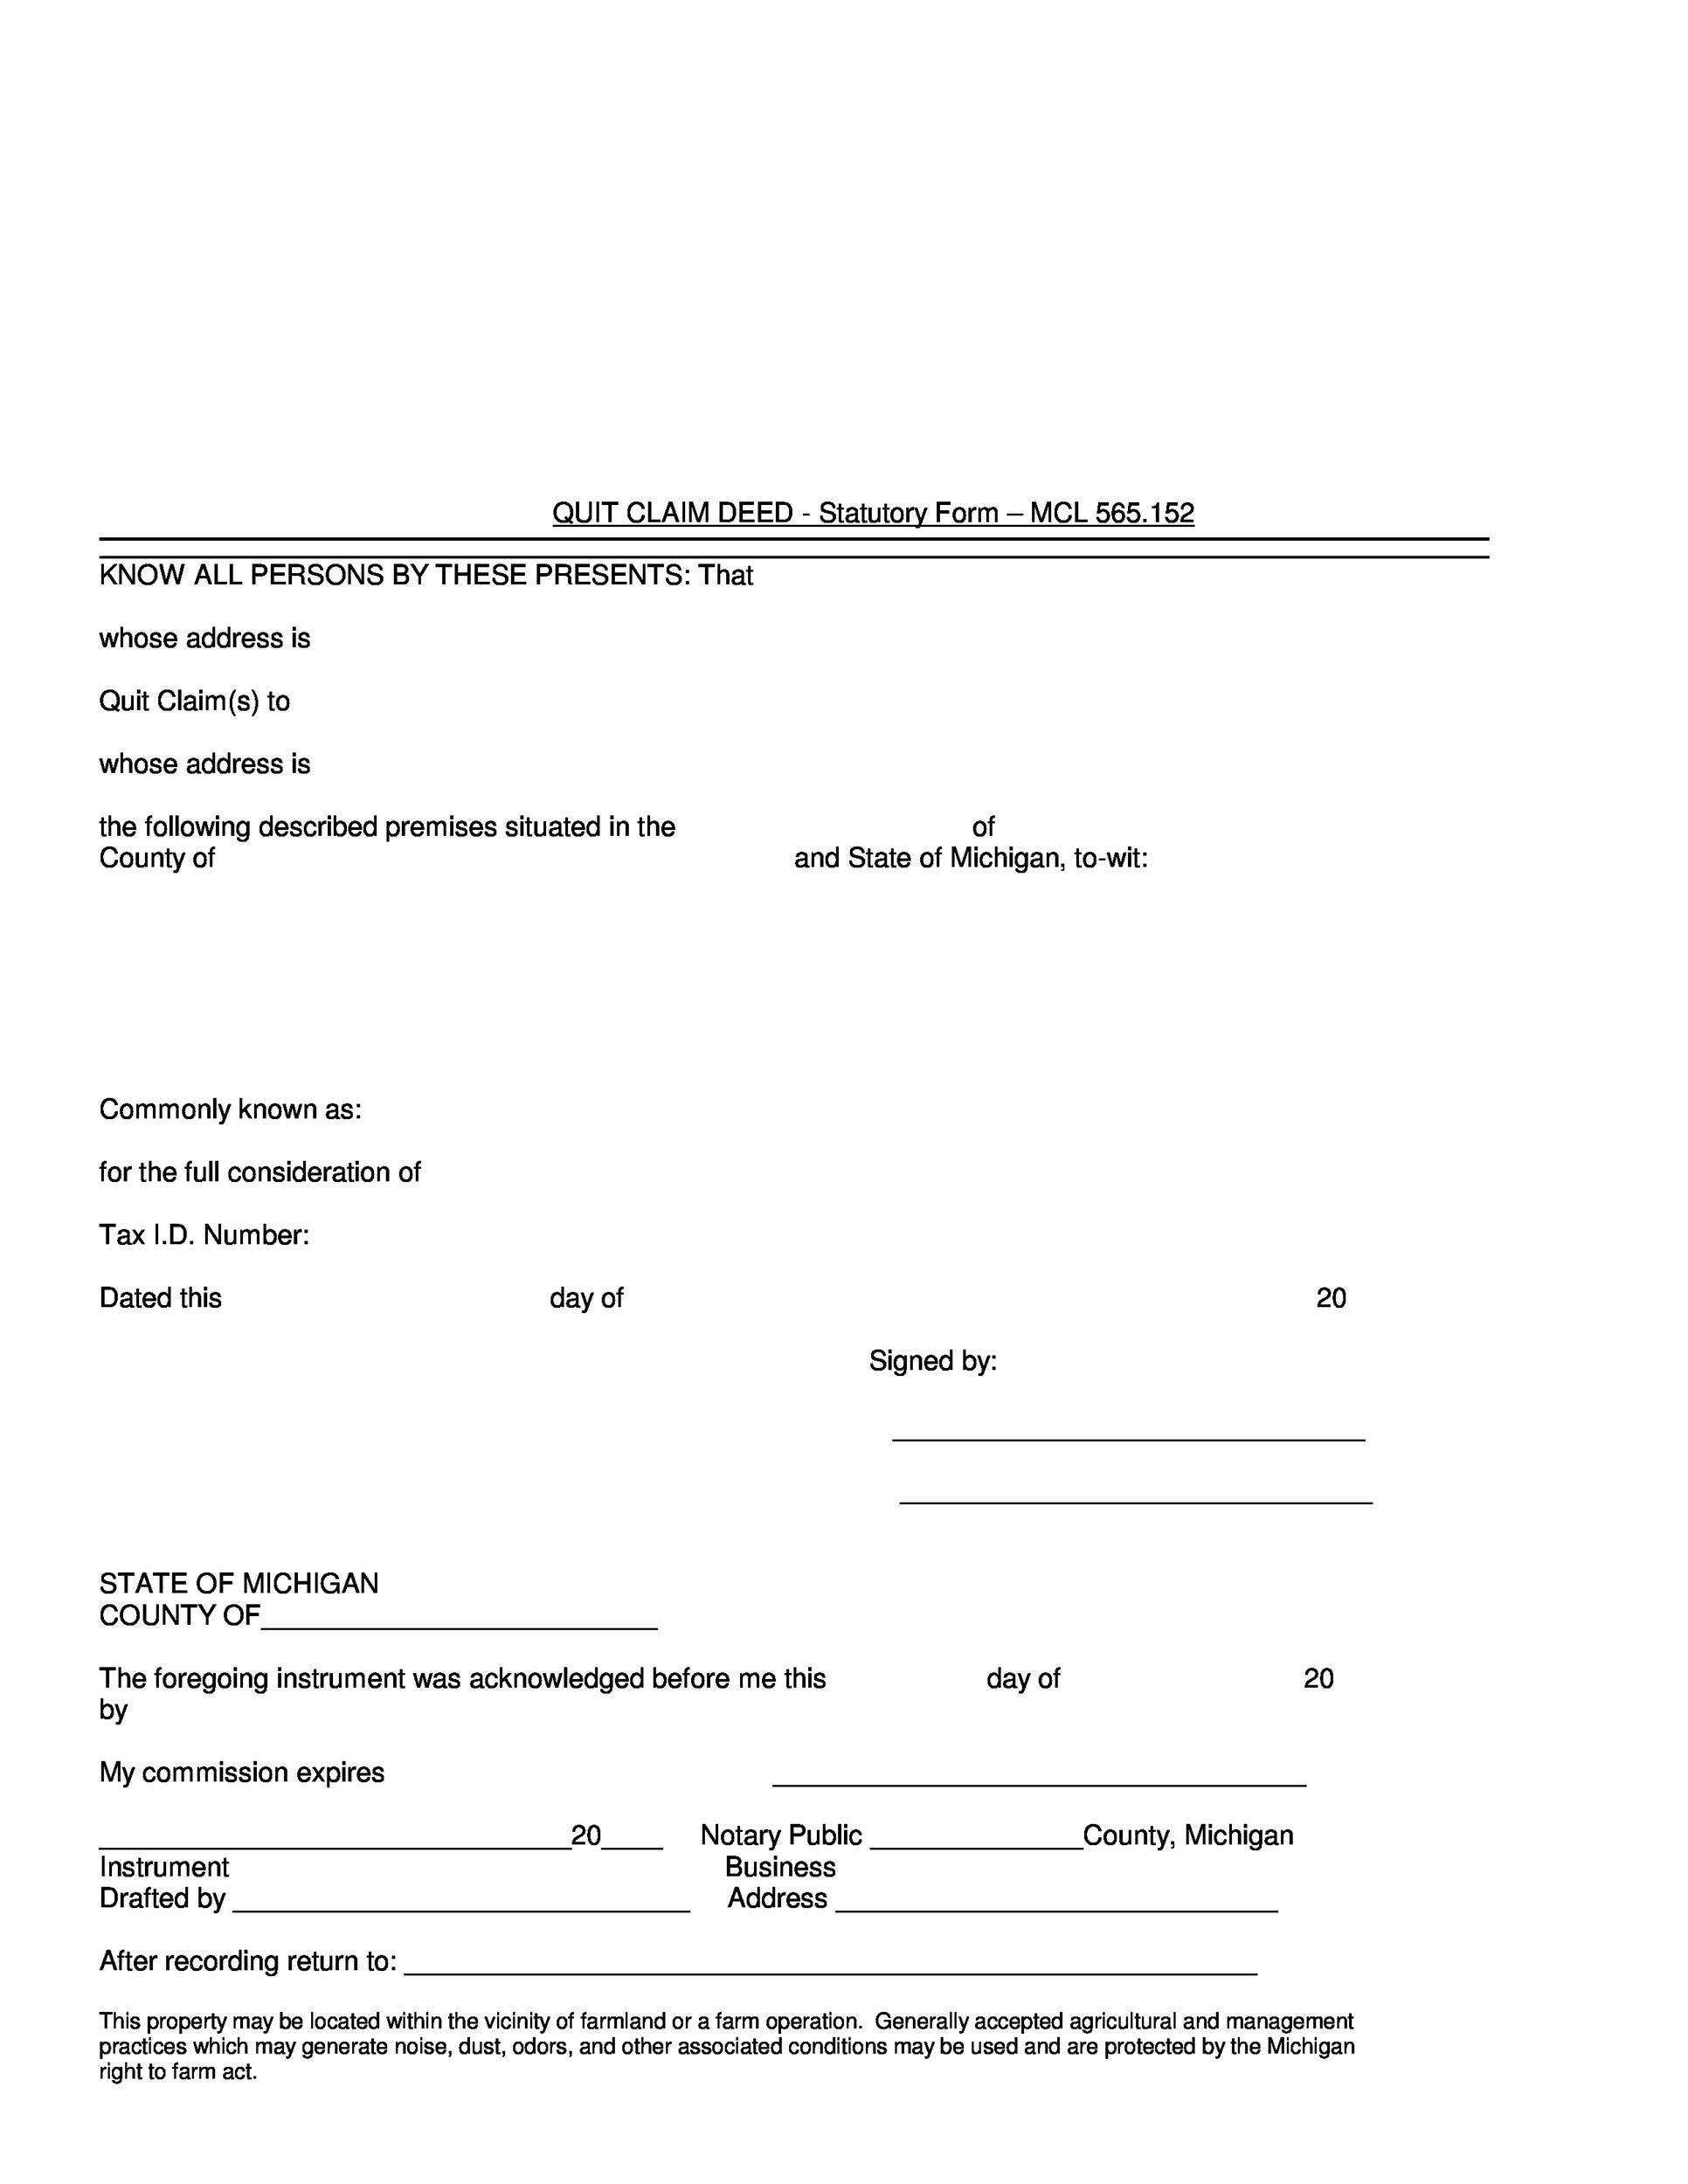 Printable Sample Quit Claim Deed Form Printable Template Legal Form Images